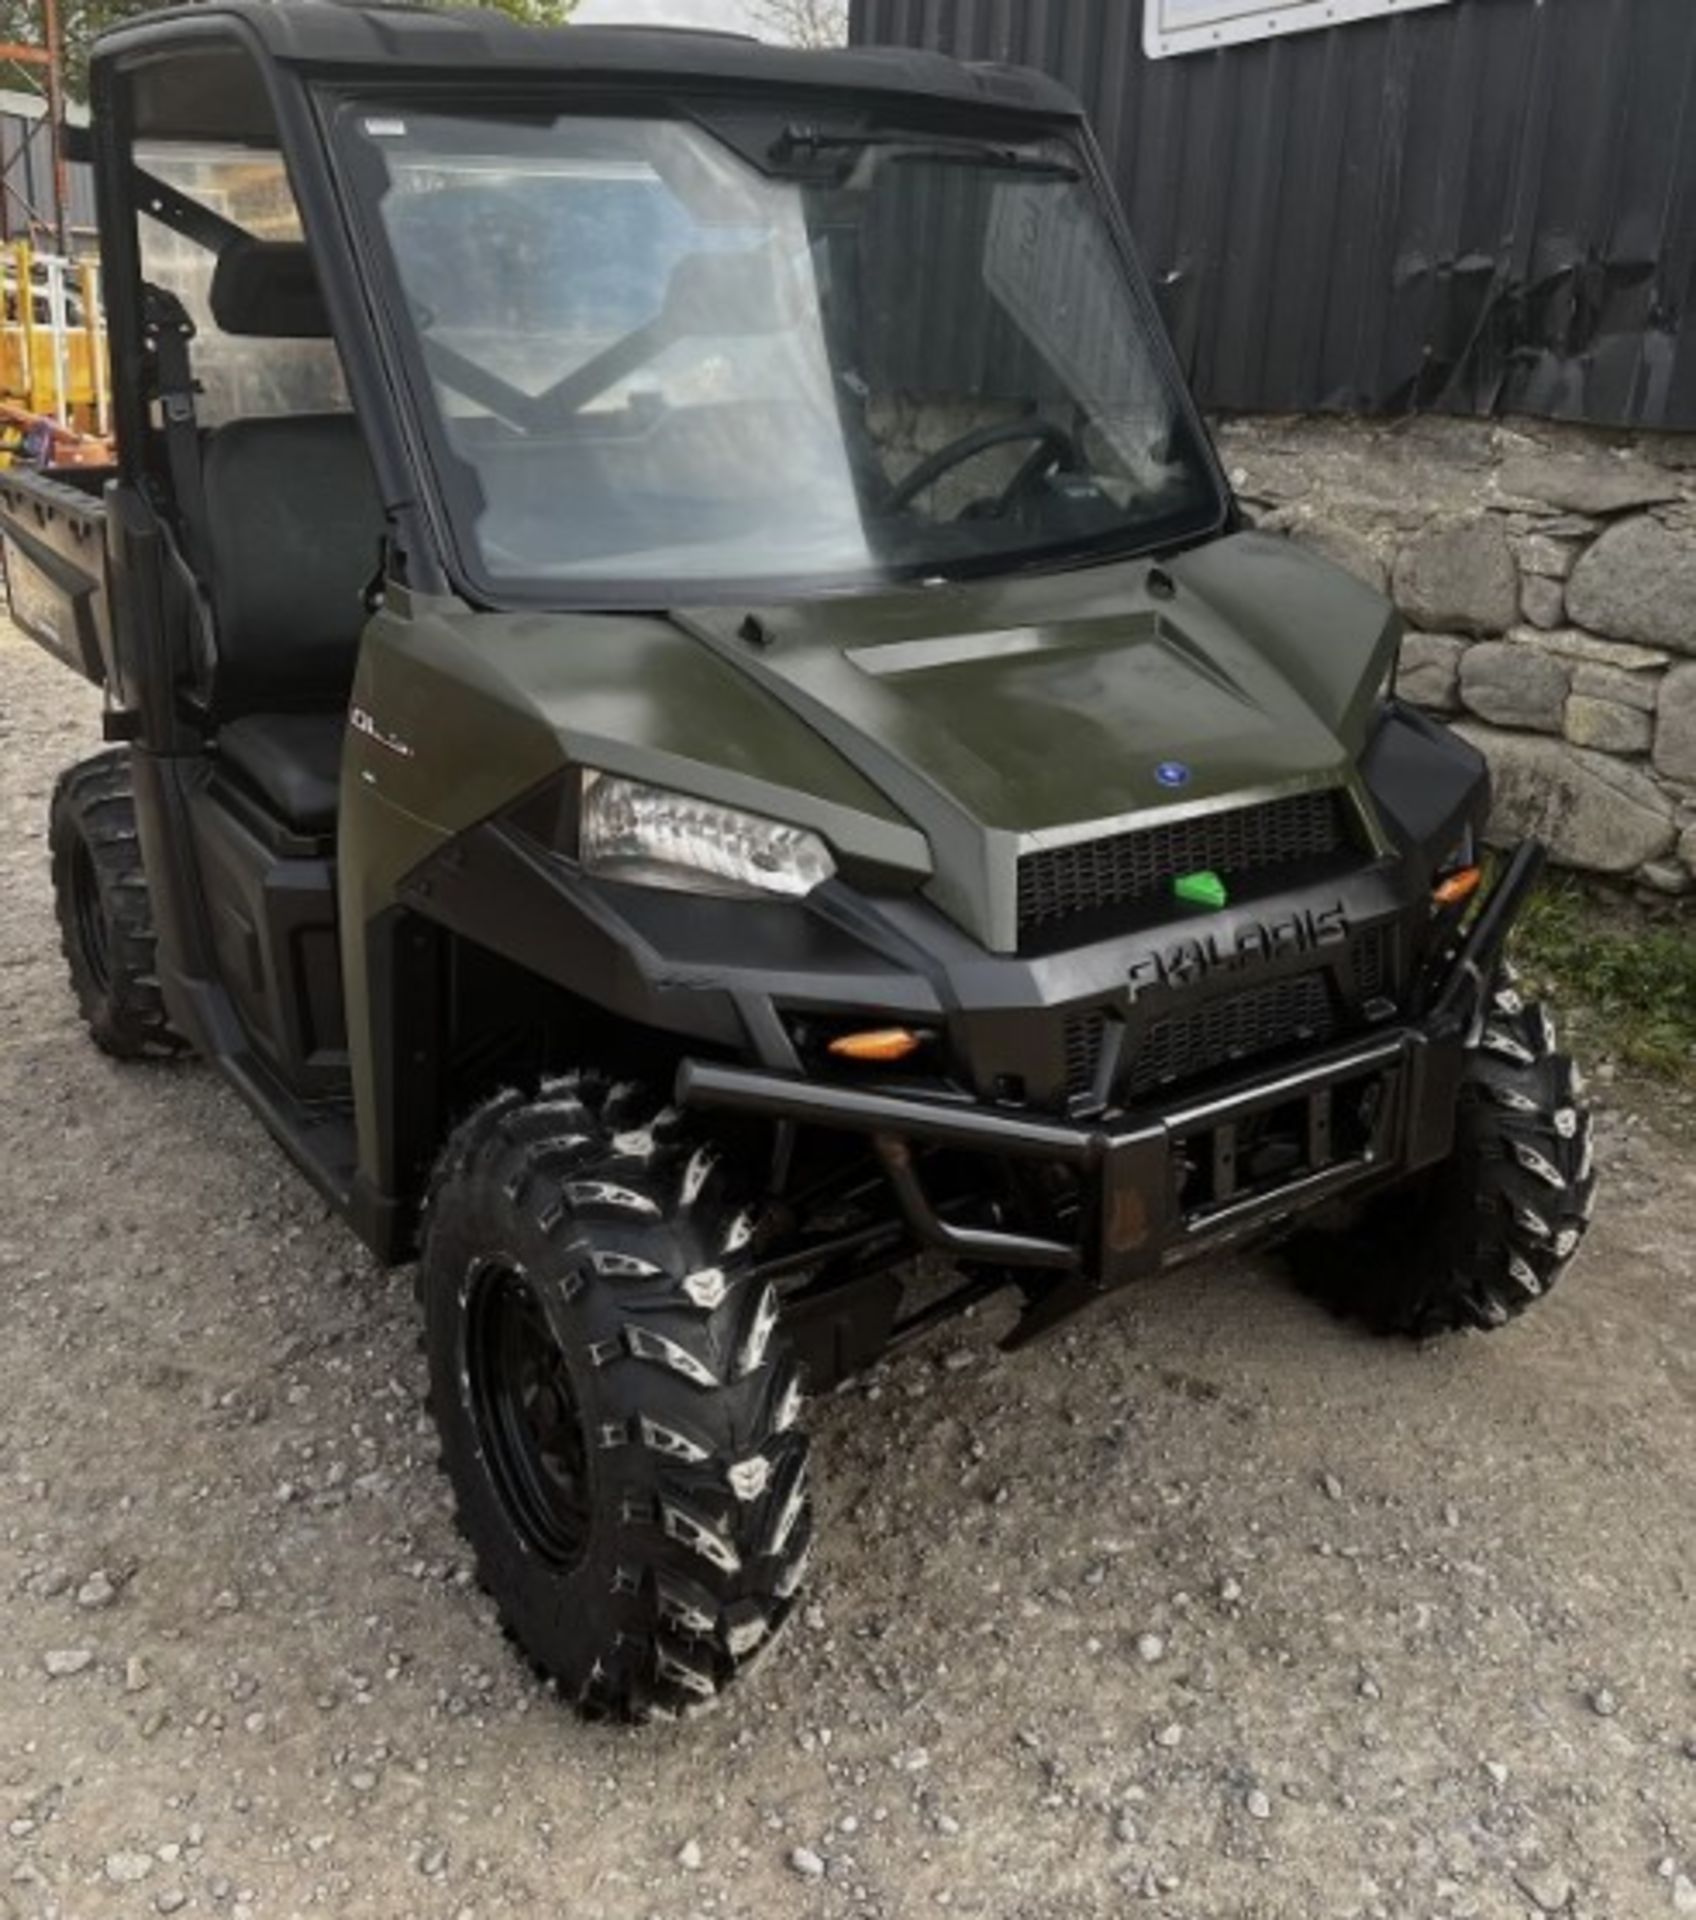 2019 POLARIS RANGER 1000D - YOUR ULTIMATE WORKHORSE FOR AGRICULTURAL TASKS - Image 9 of 11